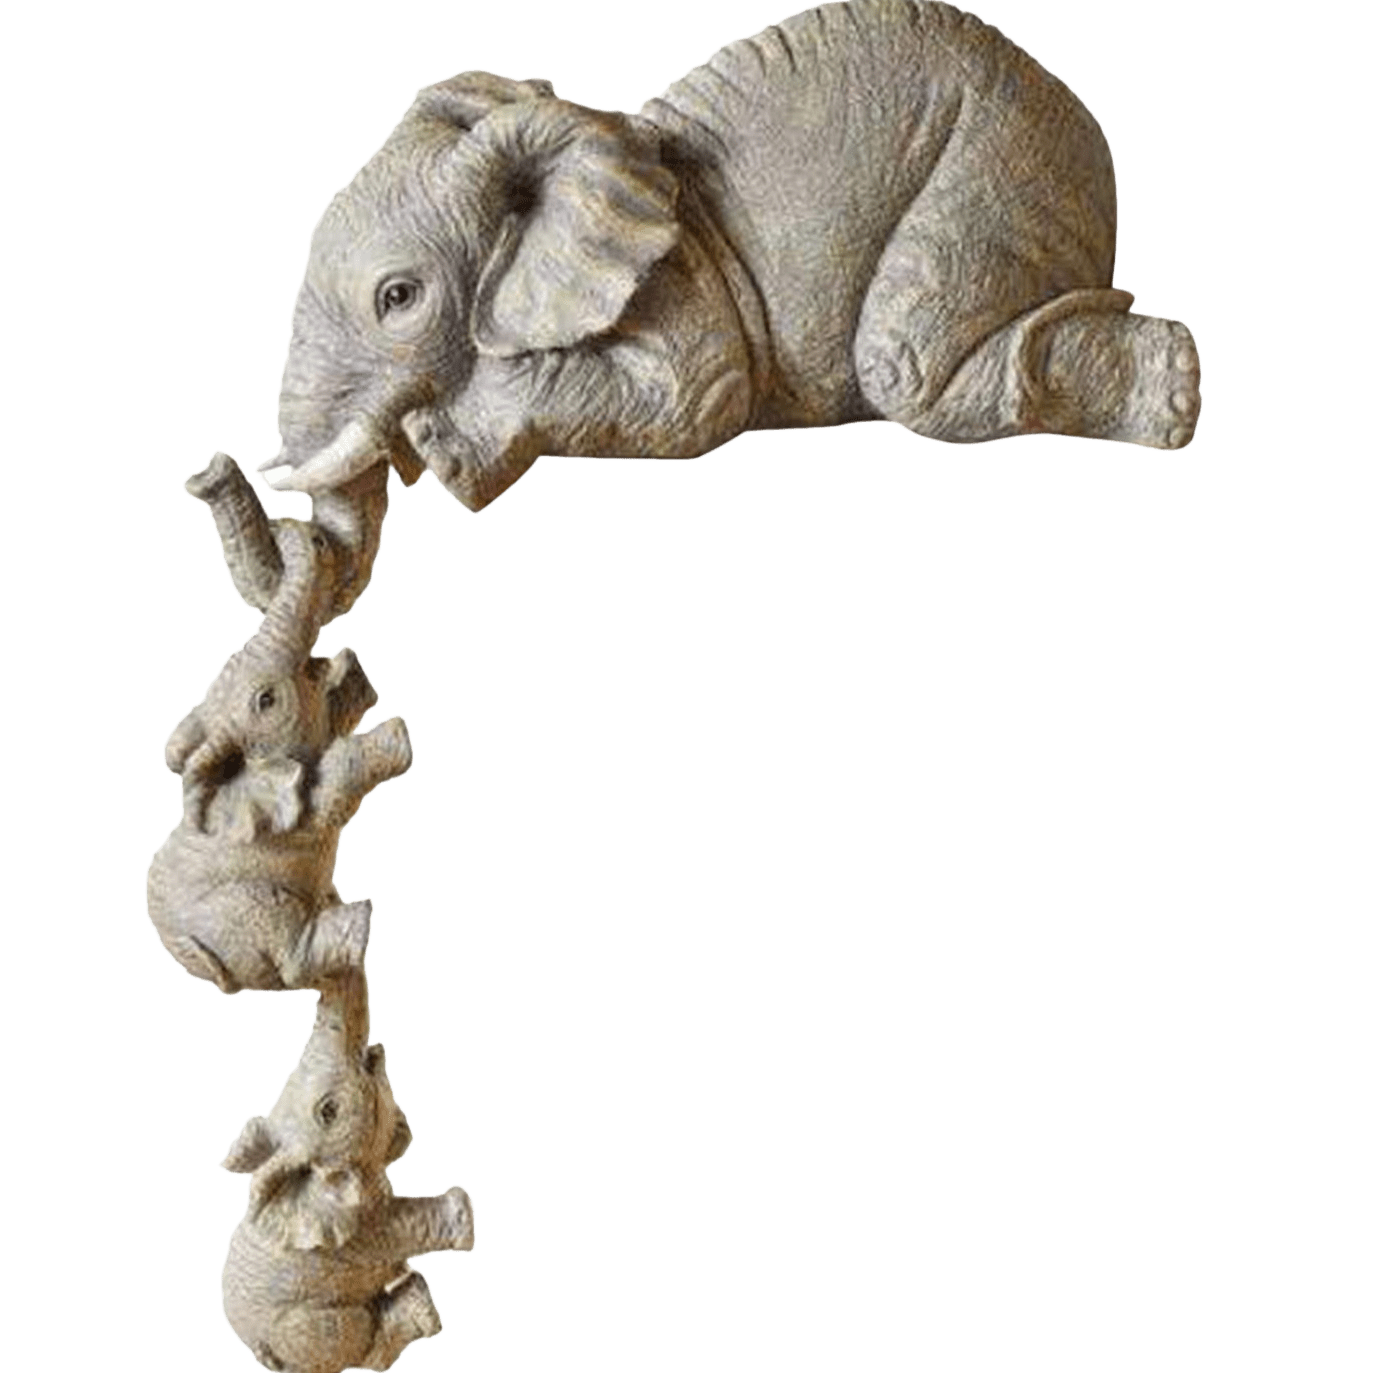 Handcrafted Elephant Family Statue Decoration Animal Figurine Ornament - Home Decor Gifts and More